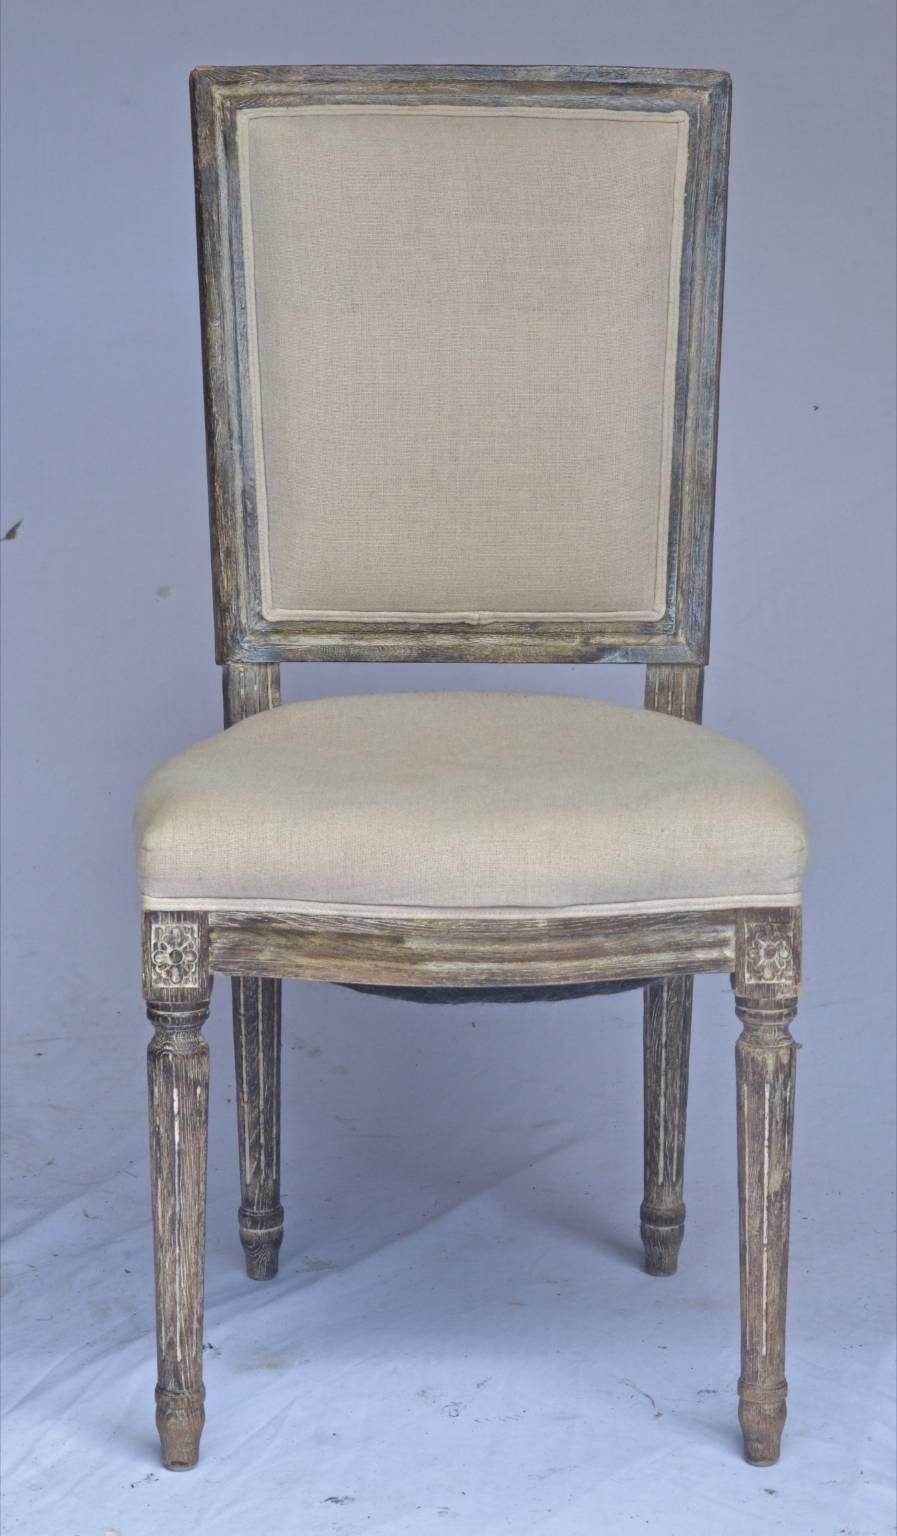 Unusual mid-20th century set of six Gustavian dining chairs in distressed paint finish.

Lovely detail in the fluted legs and rosettes with carved front edge and fully webbed seats for added comfort.

Old fabric will be stripped off, the seats